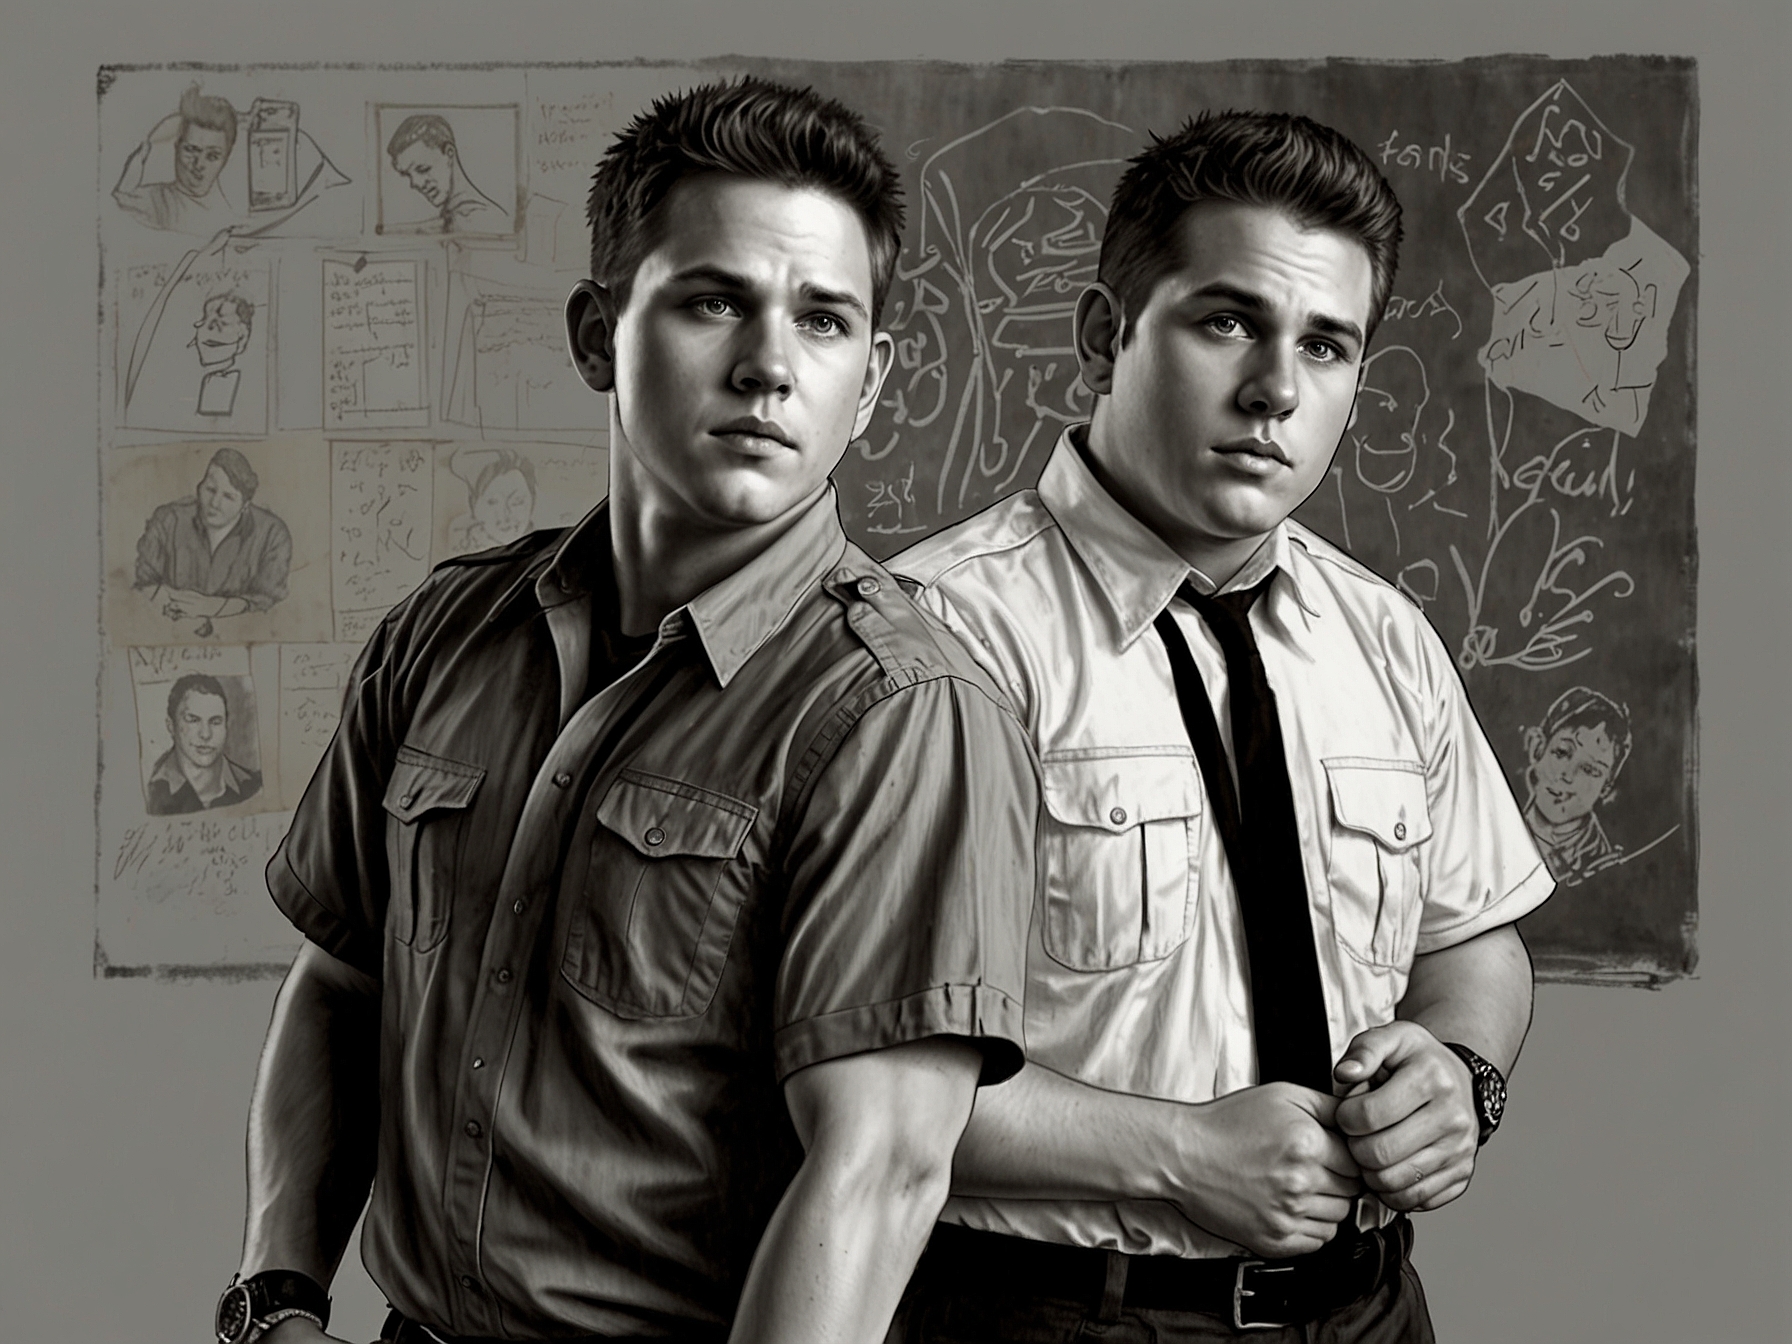 An illustration of Channing Tatum and Jonah Hill in their iconic '21 Jump Street' roles, highlighting their chemistry and camaraderie that's central to the series' success.